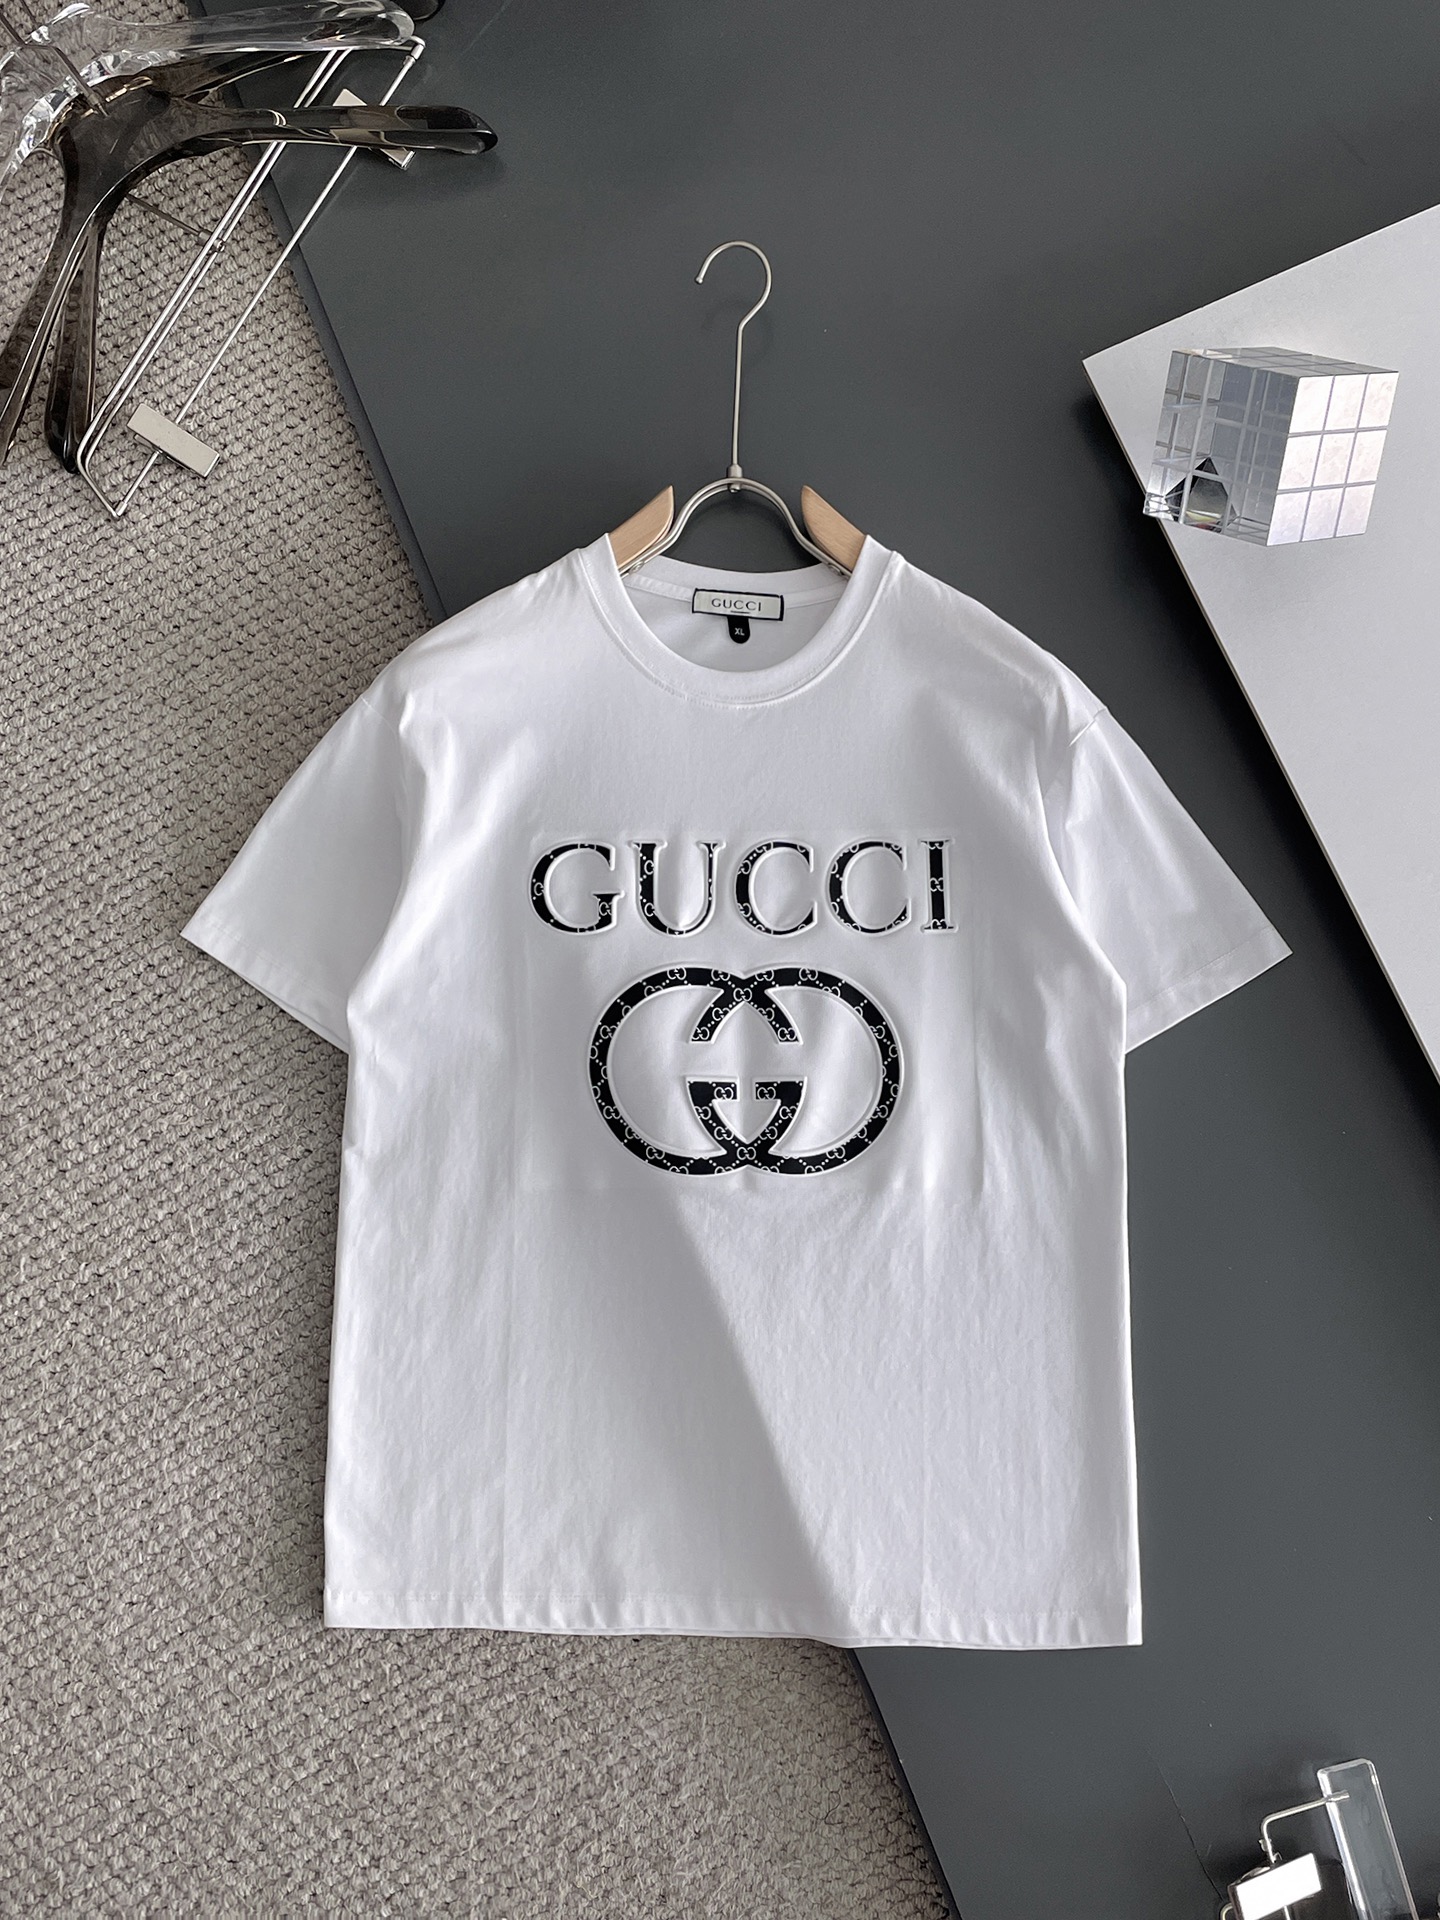 Gucci Clothing T-Shirt Men Cotton Spring/Summer Collection Fashion Short Sleeve